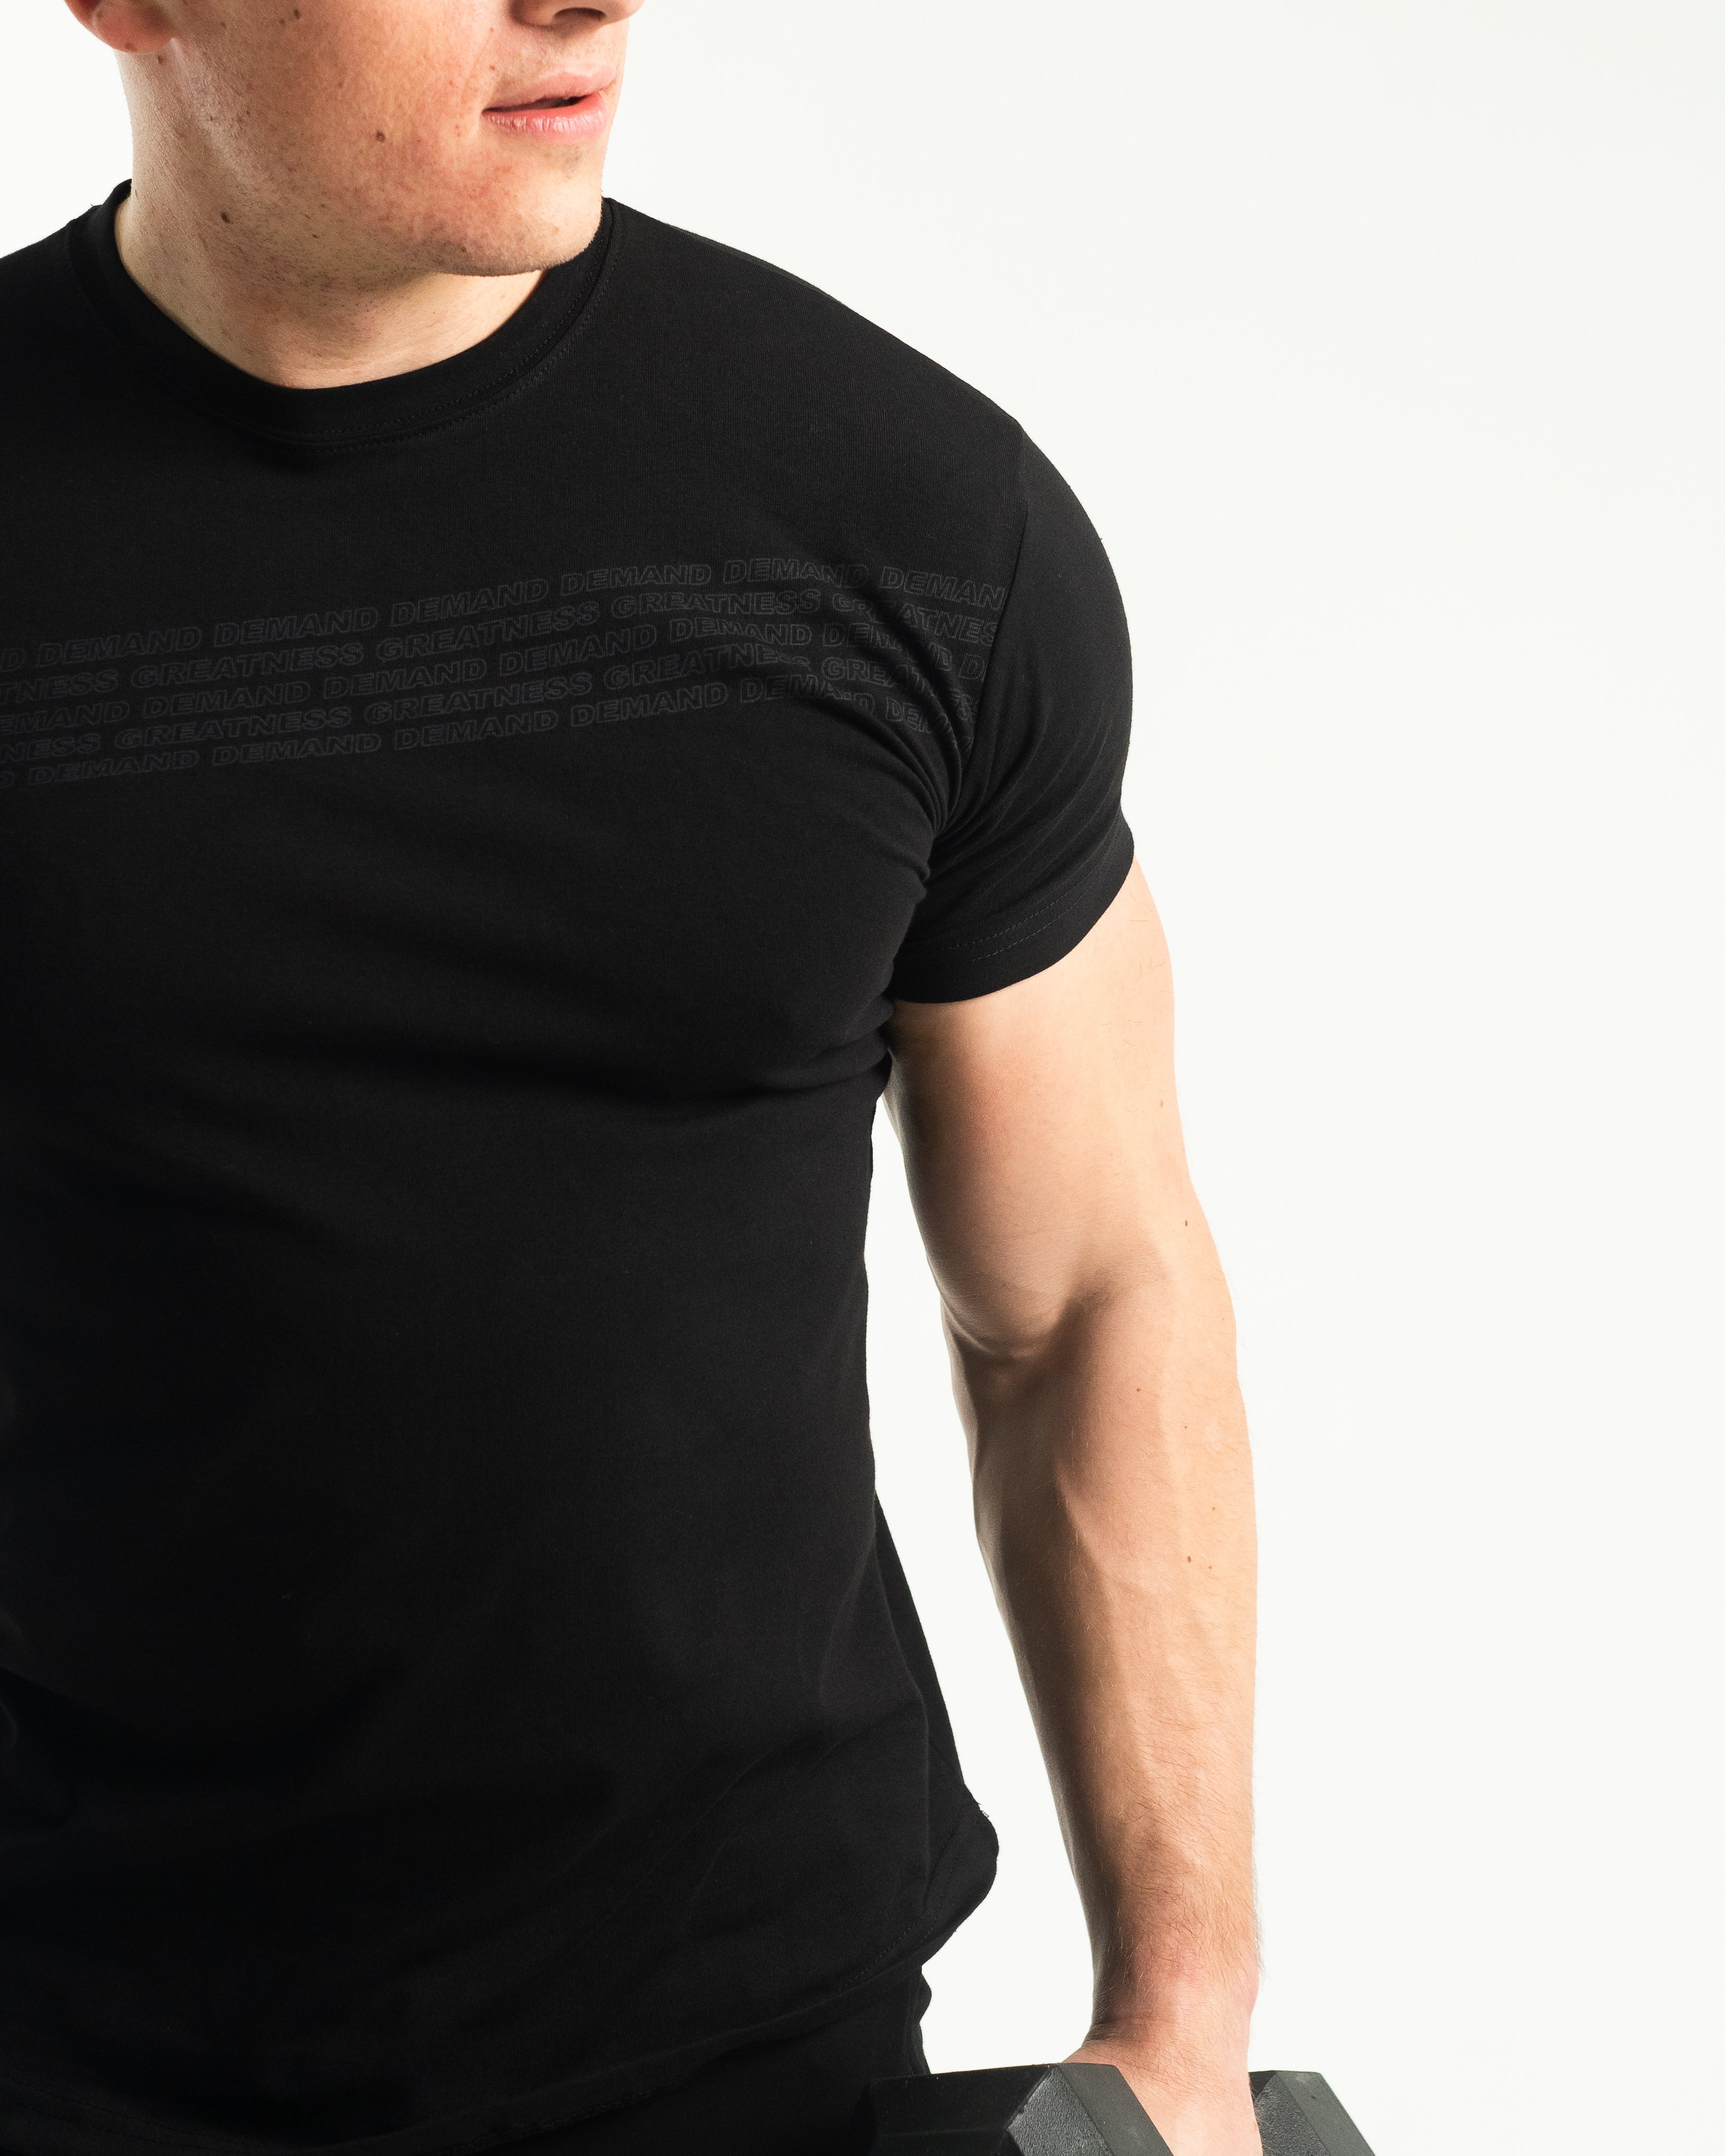 Purchase Stealth Wave Non Bar Grip Shirt from A7 UK, shipping to UK, Norway, Switzerland and Iceland